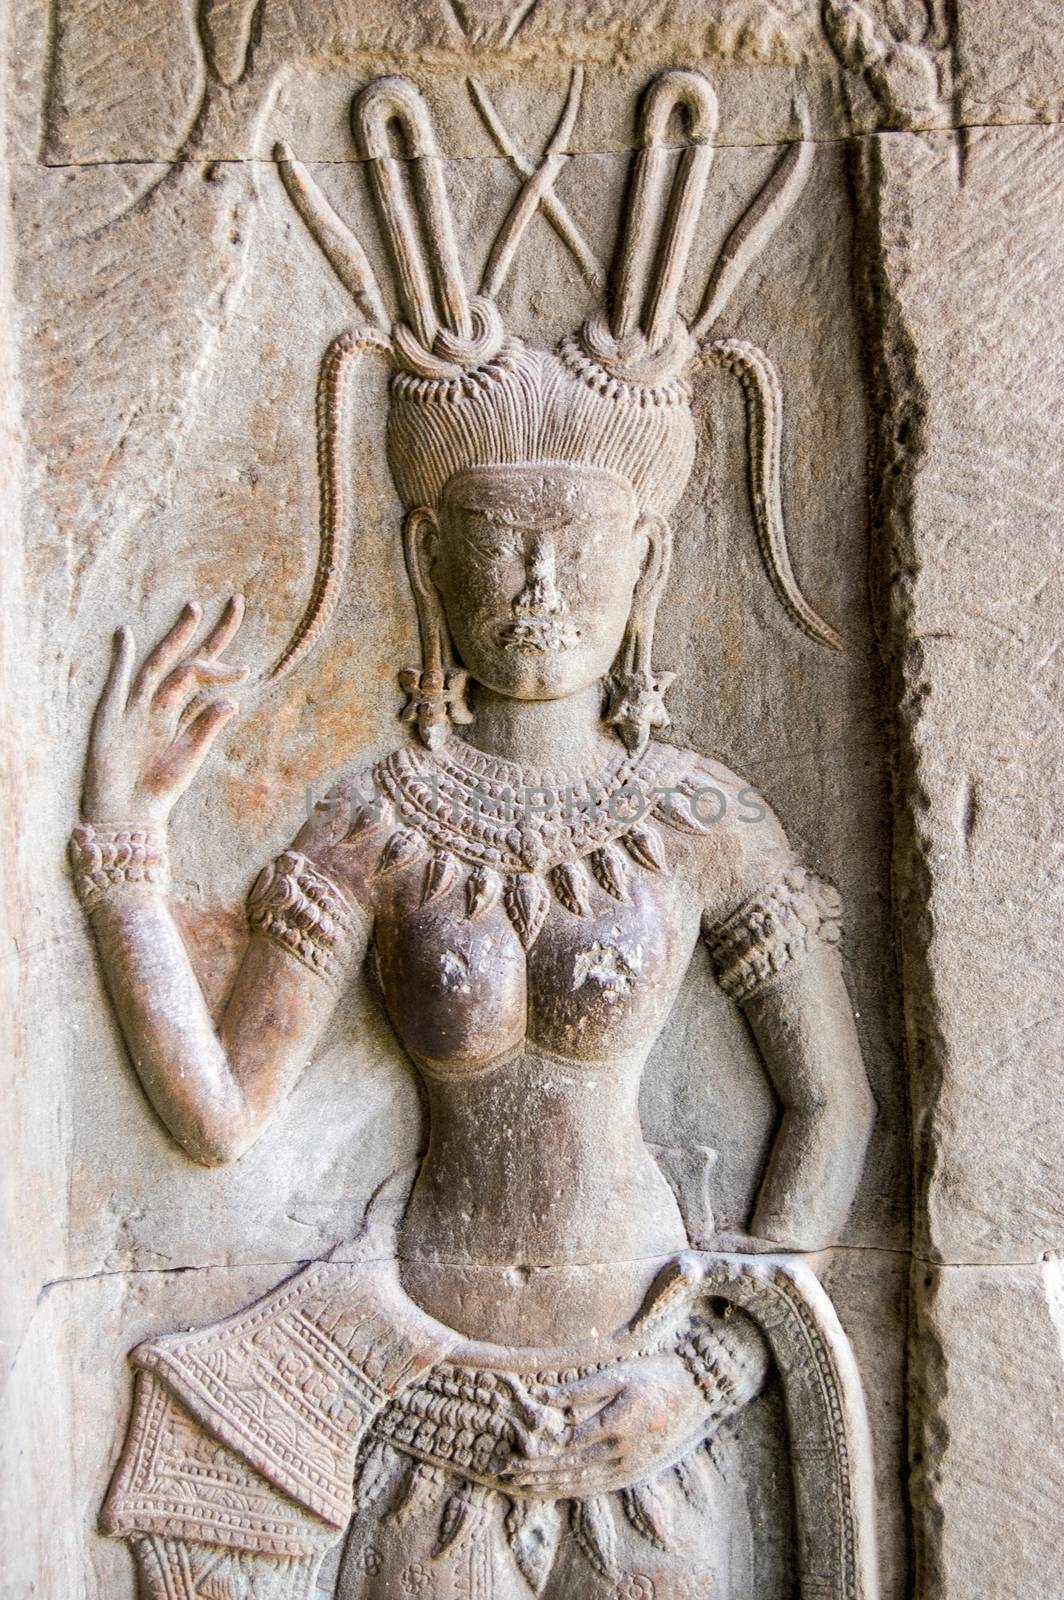 Stone carving of an Apsara Dancer, northern gallery, Angkor Wat temple, Siem Reap, Cambodia.